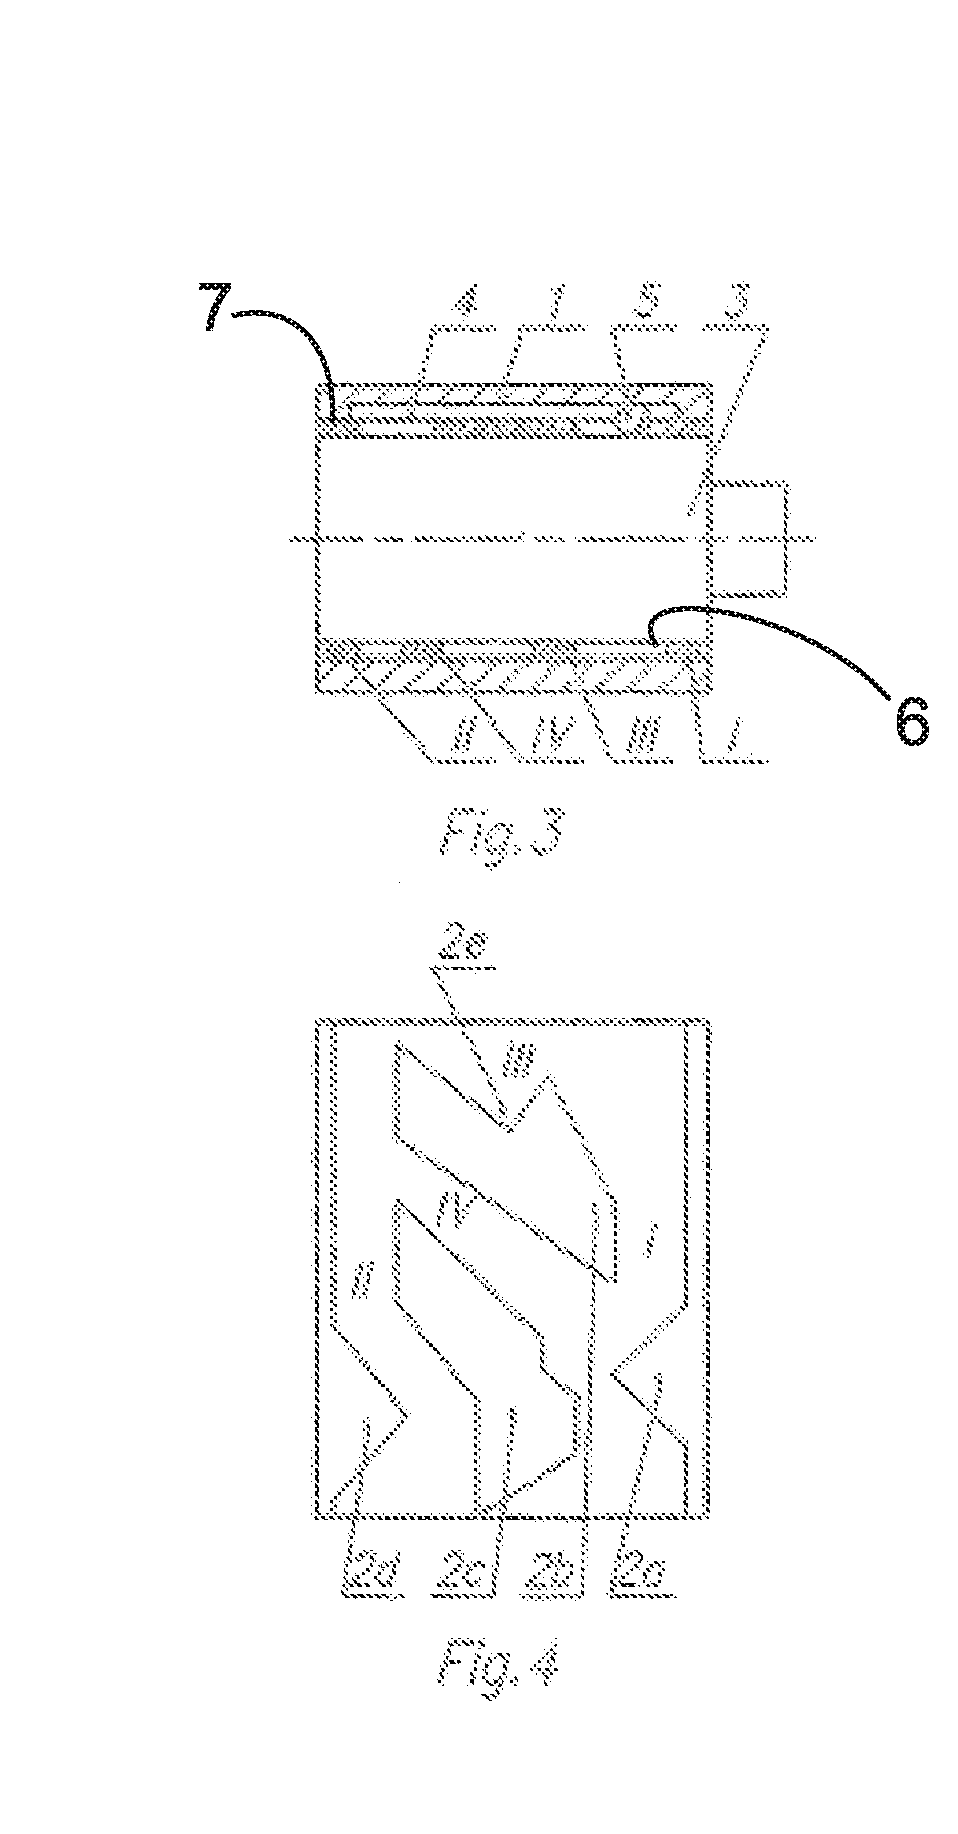 Mechanism for blocking the rotation of spring driven roller blinds